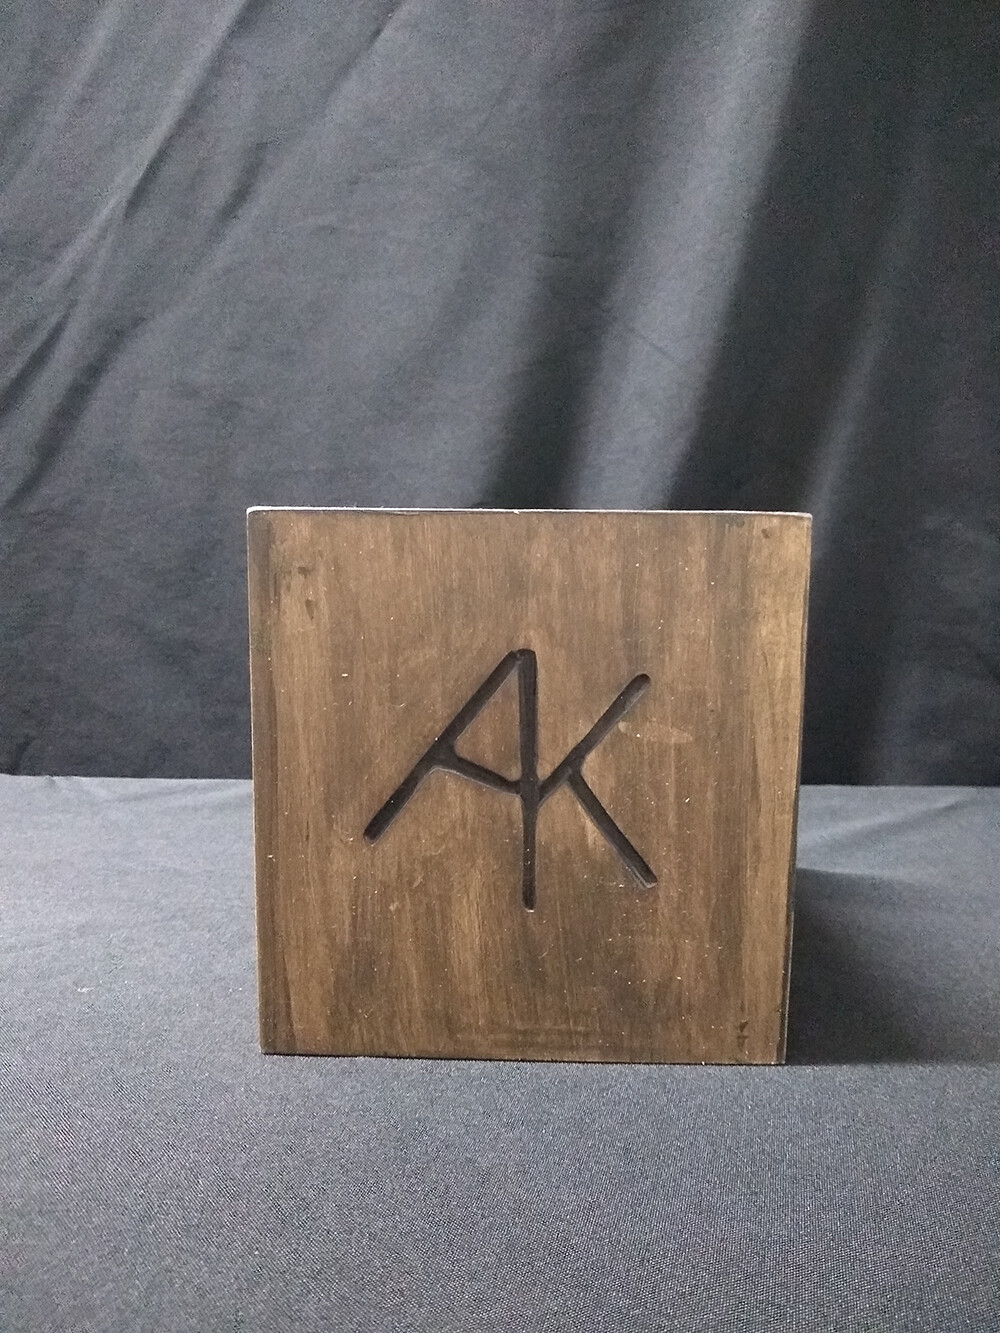 Branded Wooden Box